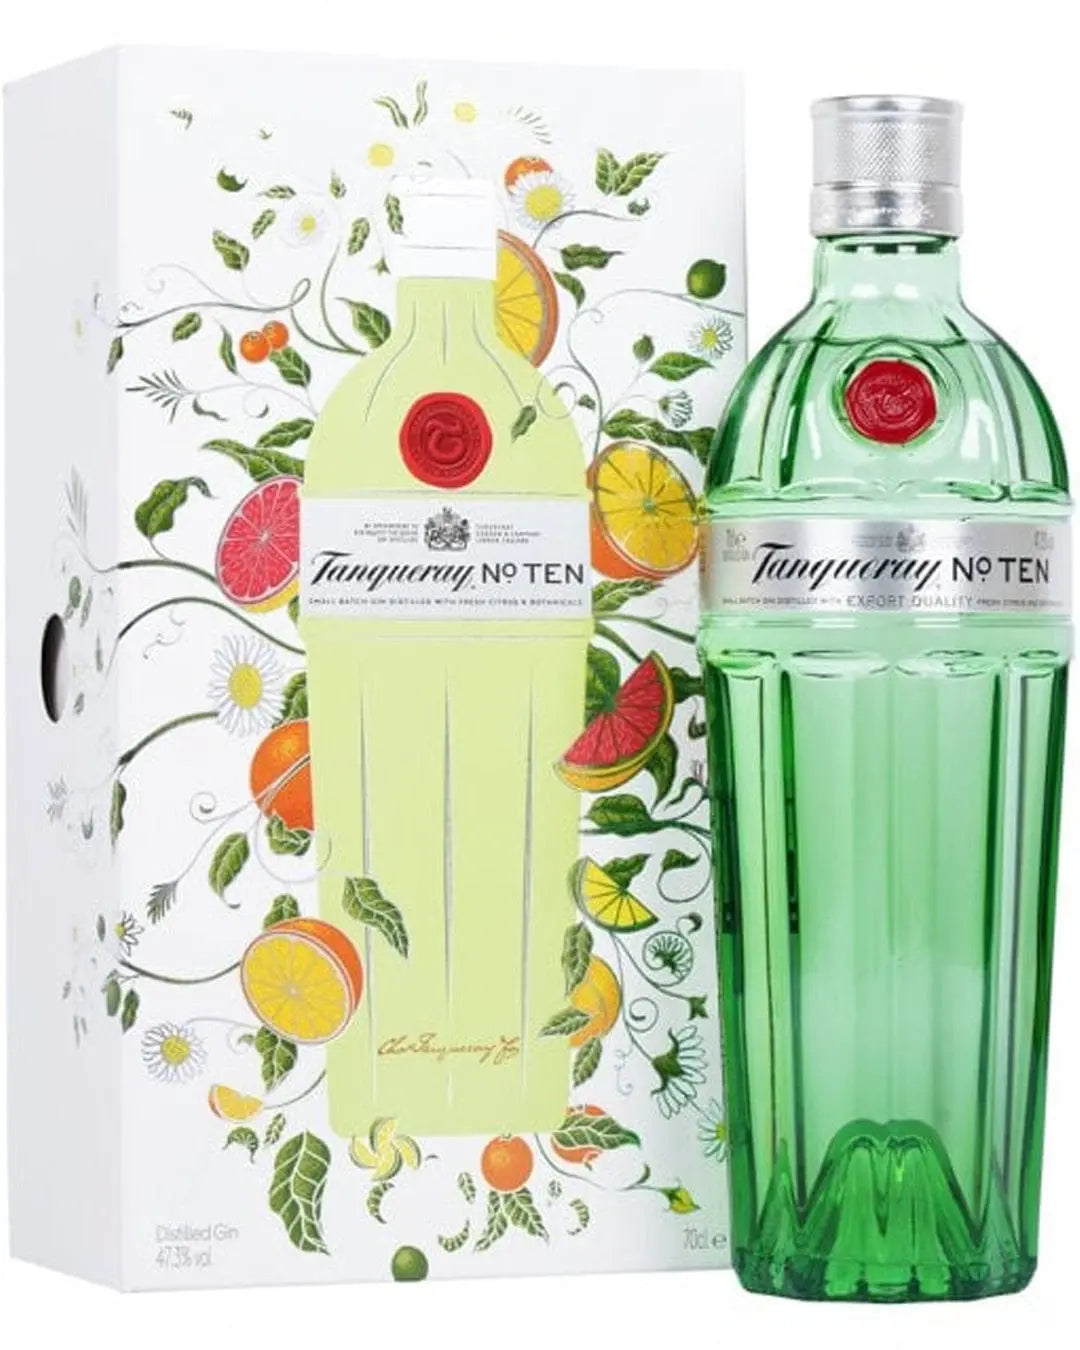 Tanqueray No.10 Gin - 'Alive with Freshness' Gift Box, 70 cl Gin